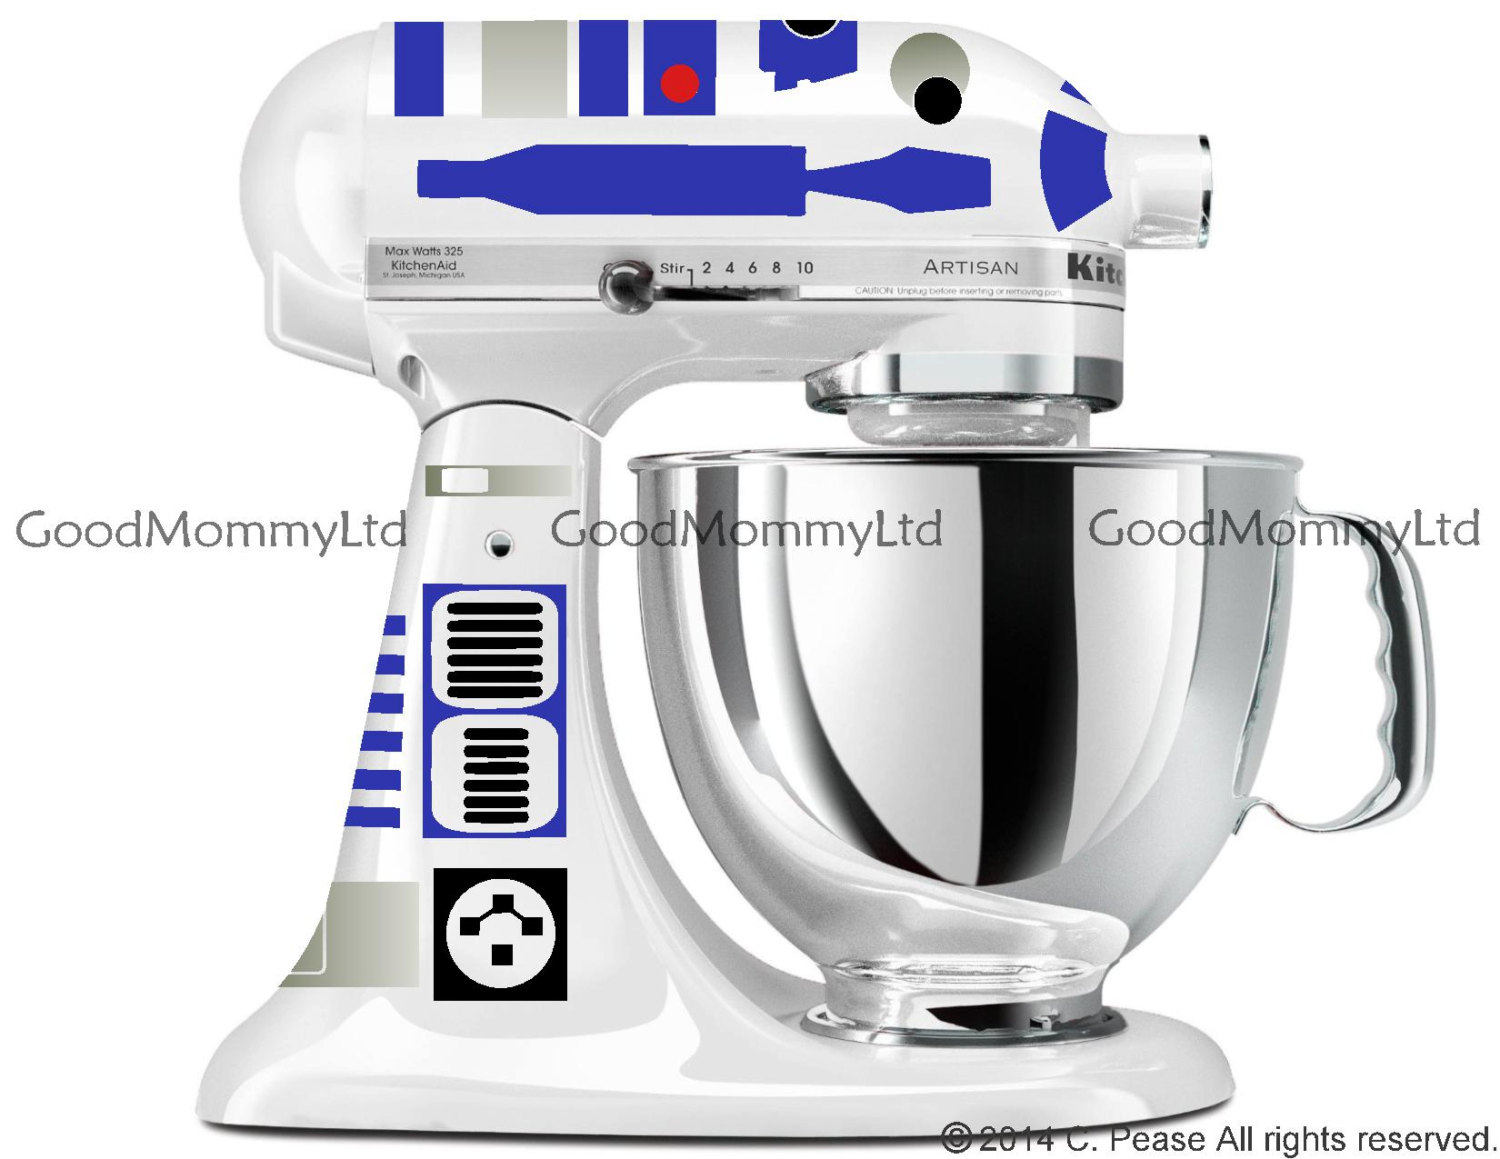 R2D2 Decal Kit Brings The Force To Your Kitchen And Beyond